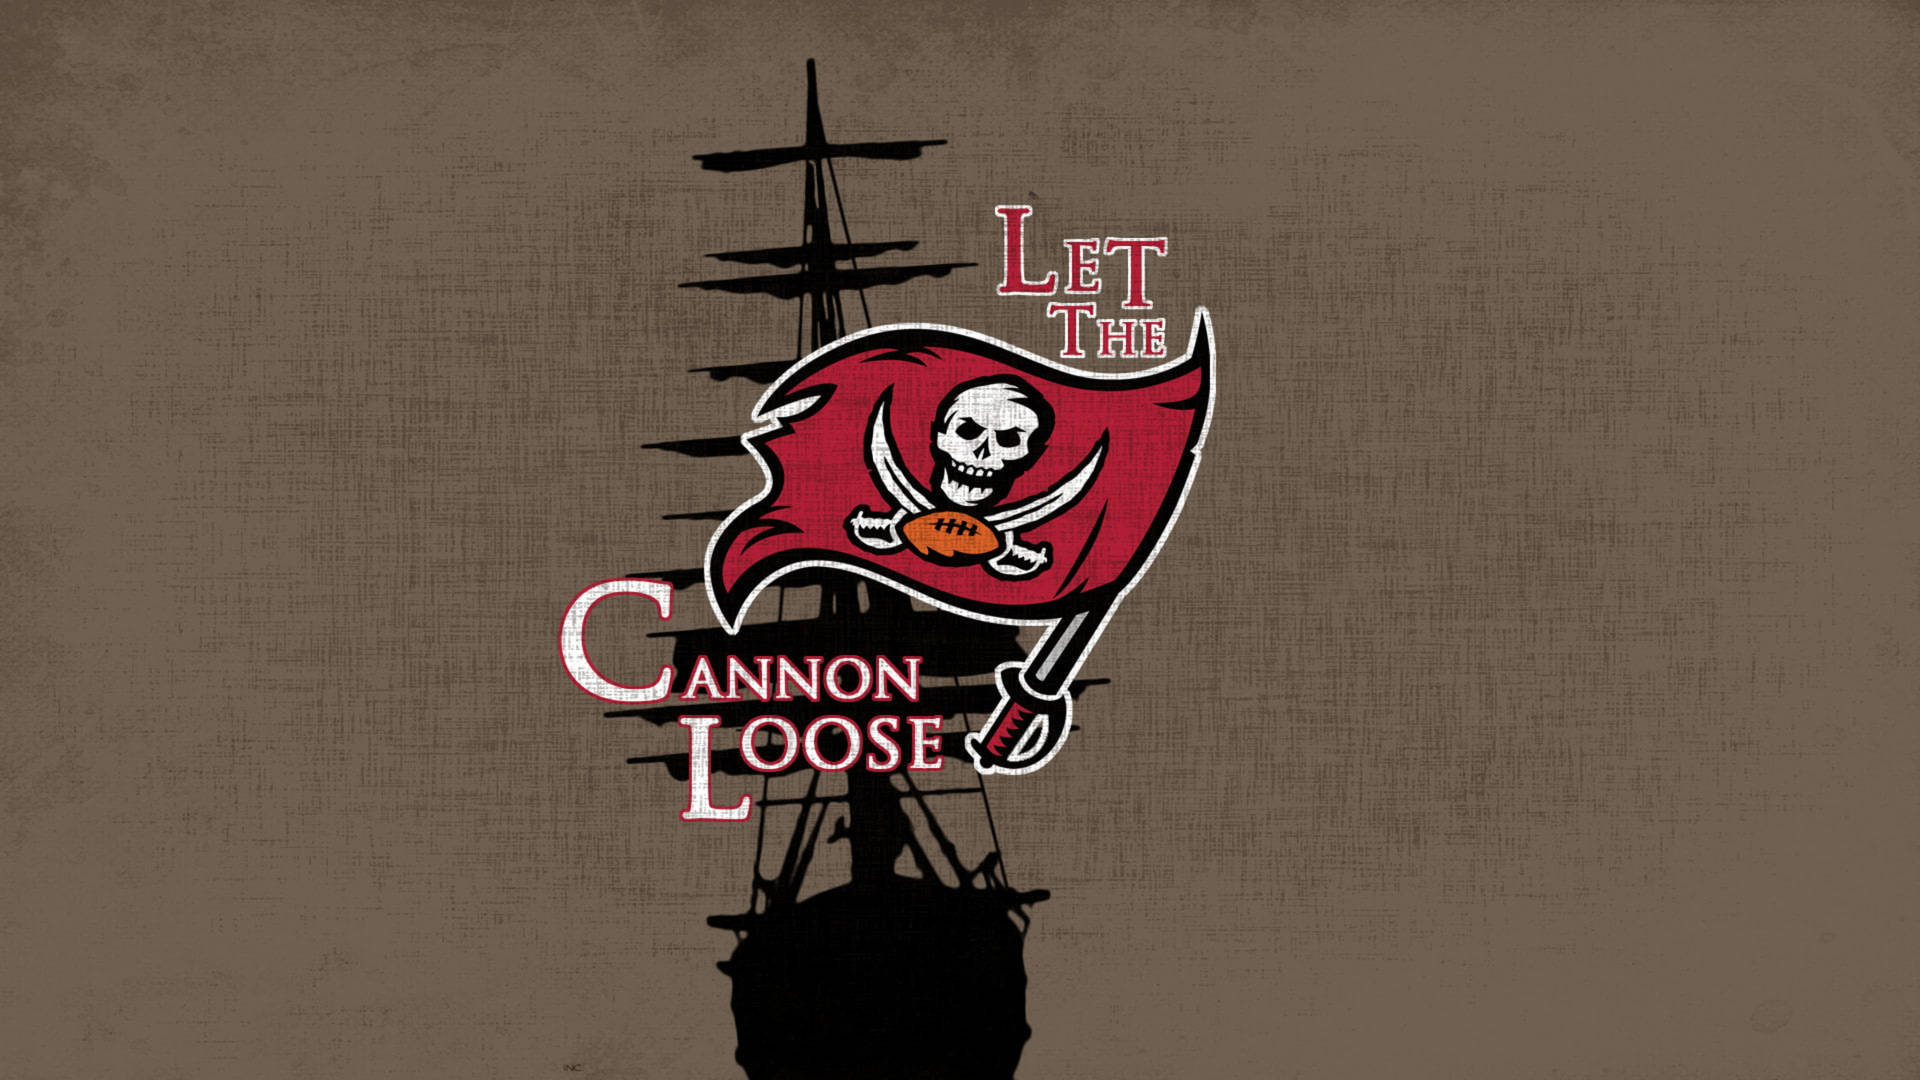 Tampa Bay Buccaneers Pirate Ship Background